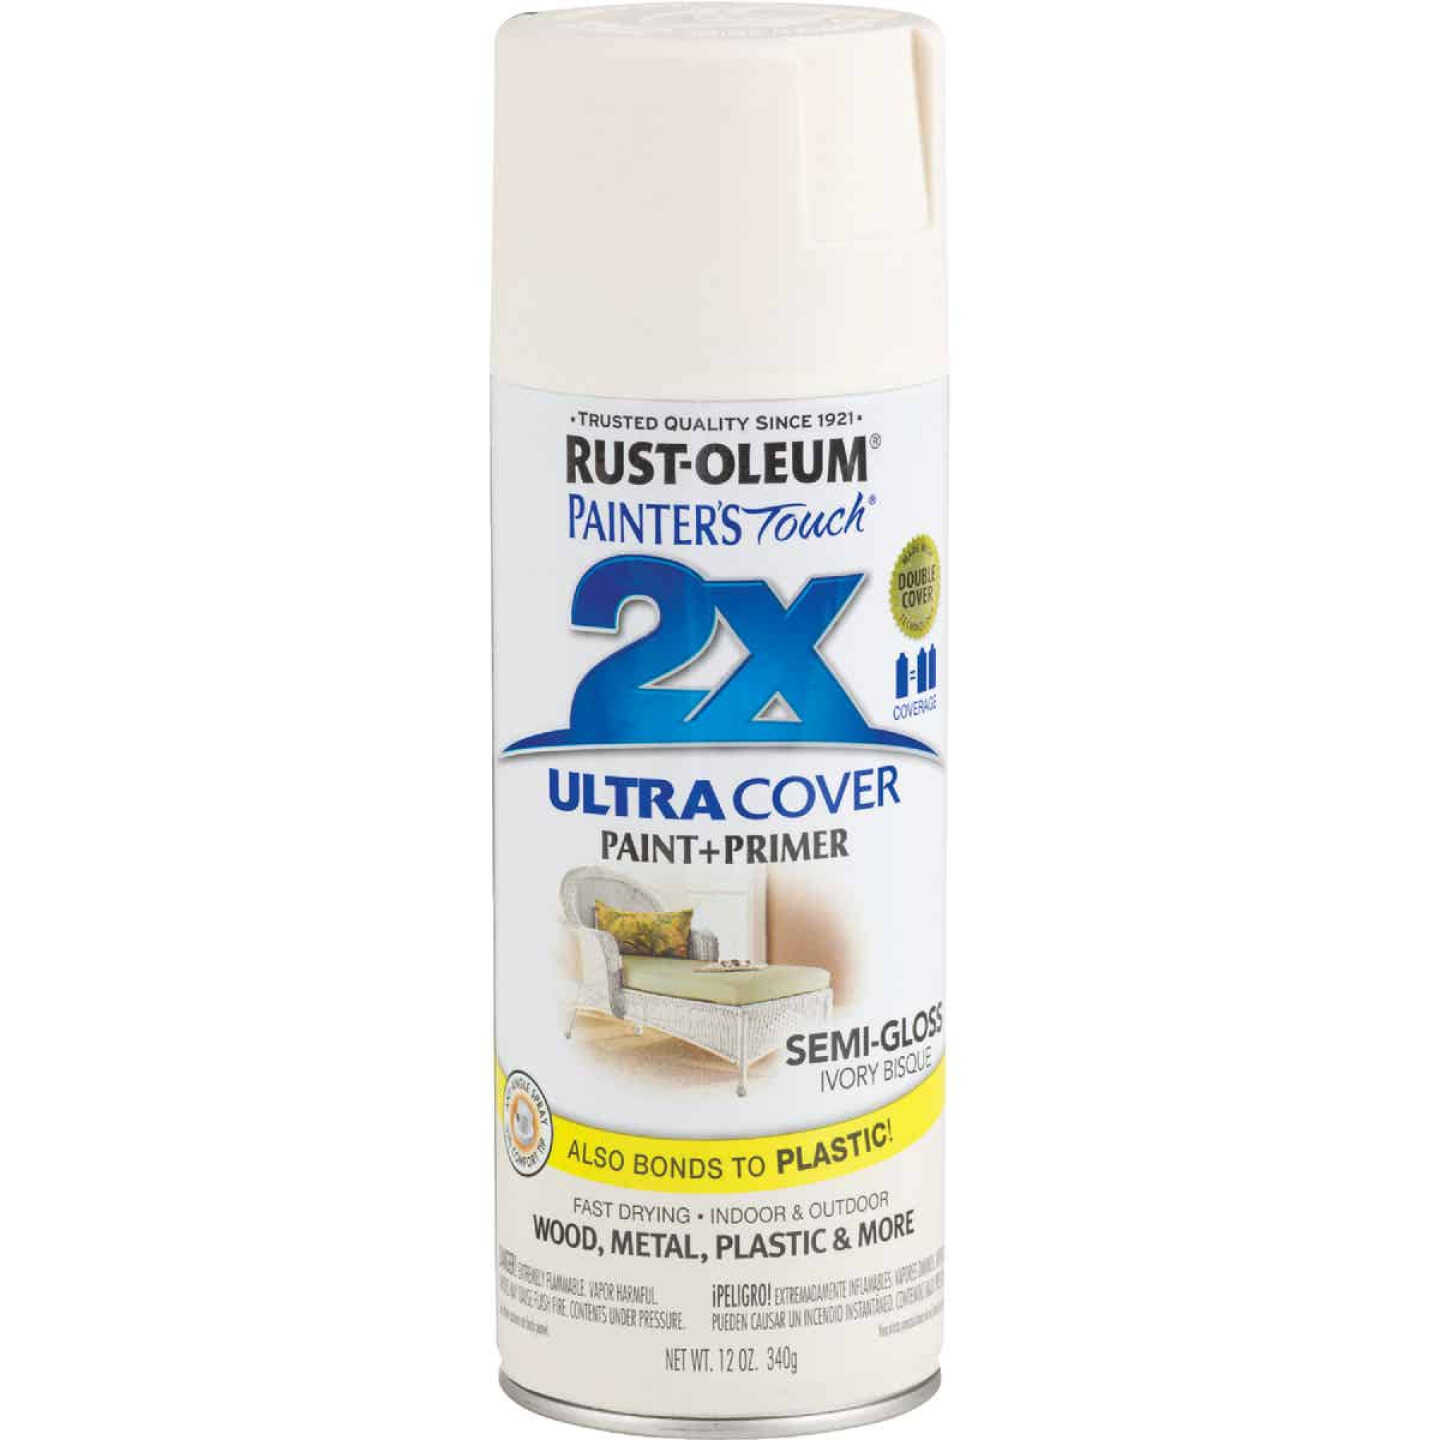 Rust-Oleum Painter's Touch 2X Ultra Cover Gloss Spray Paint